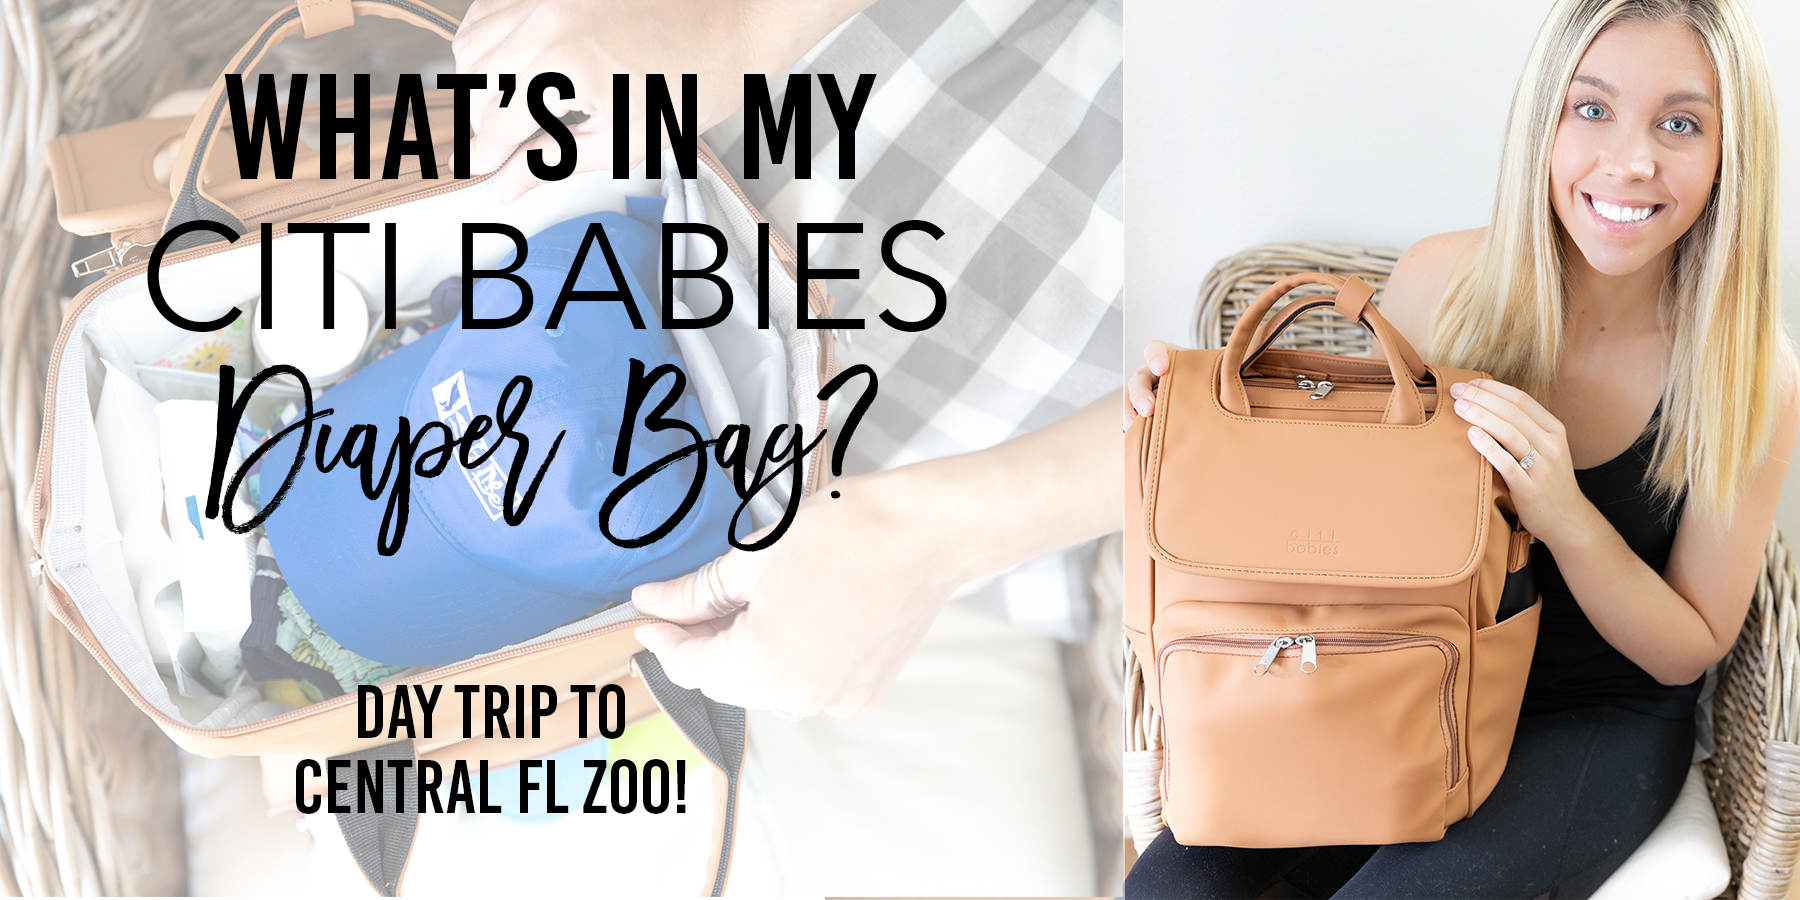 What’s in My Citi Babies Diaper Bag? | Day Trip to Central FL Zoo!